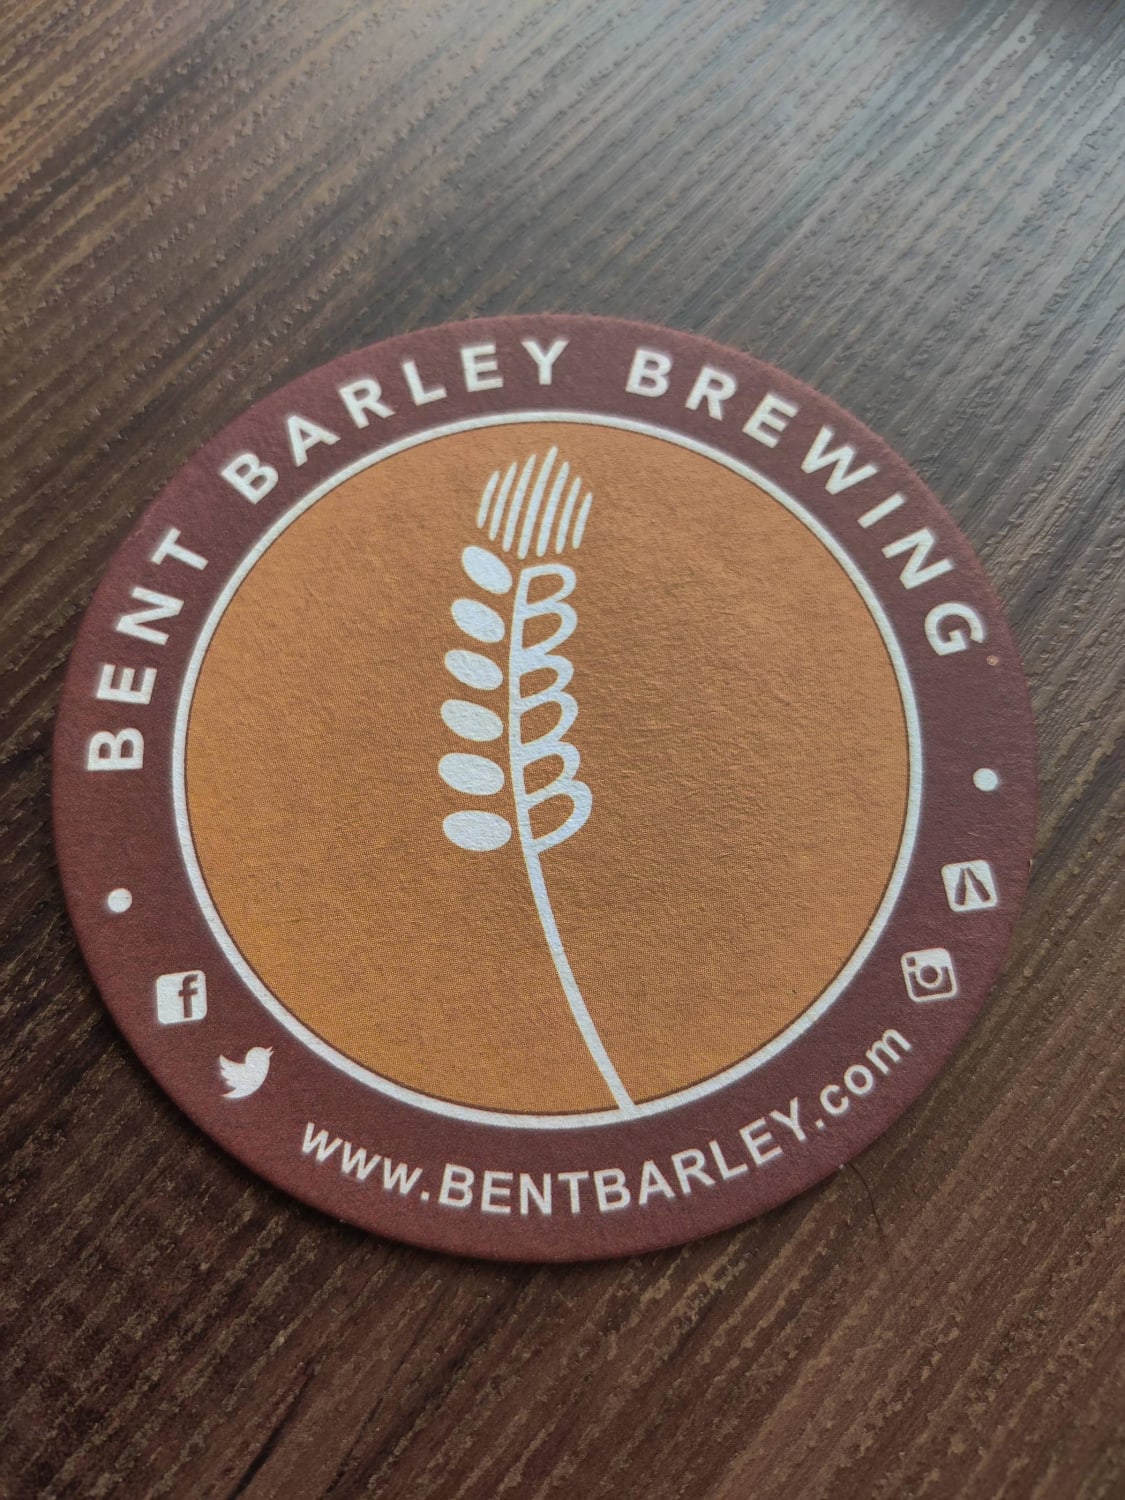 The logo at this brewery